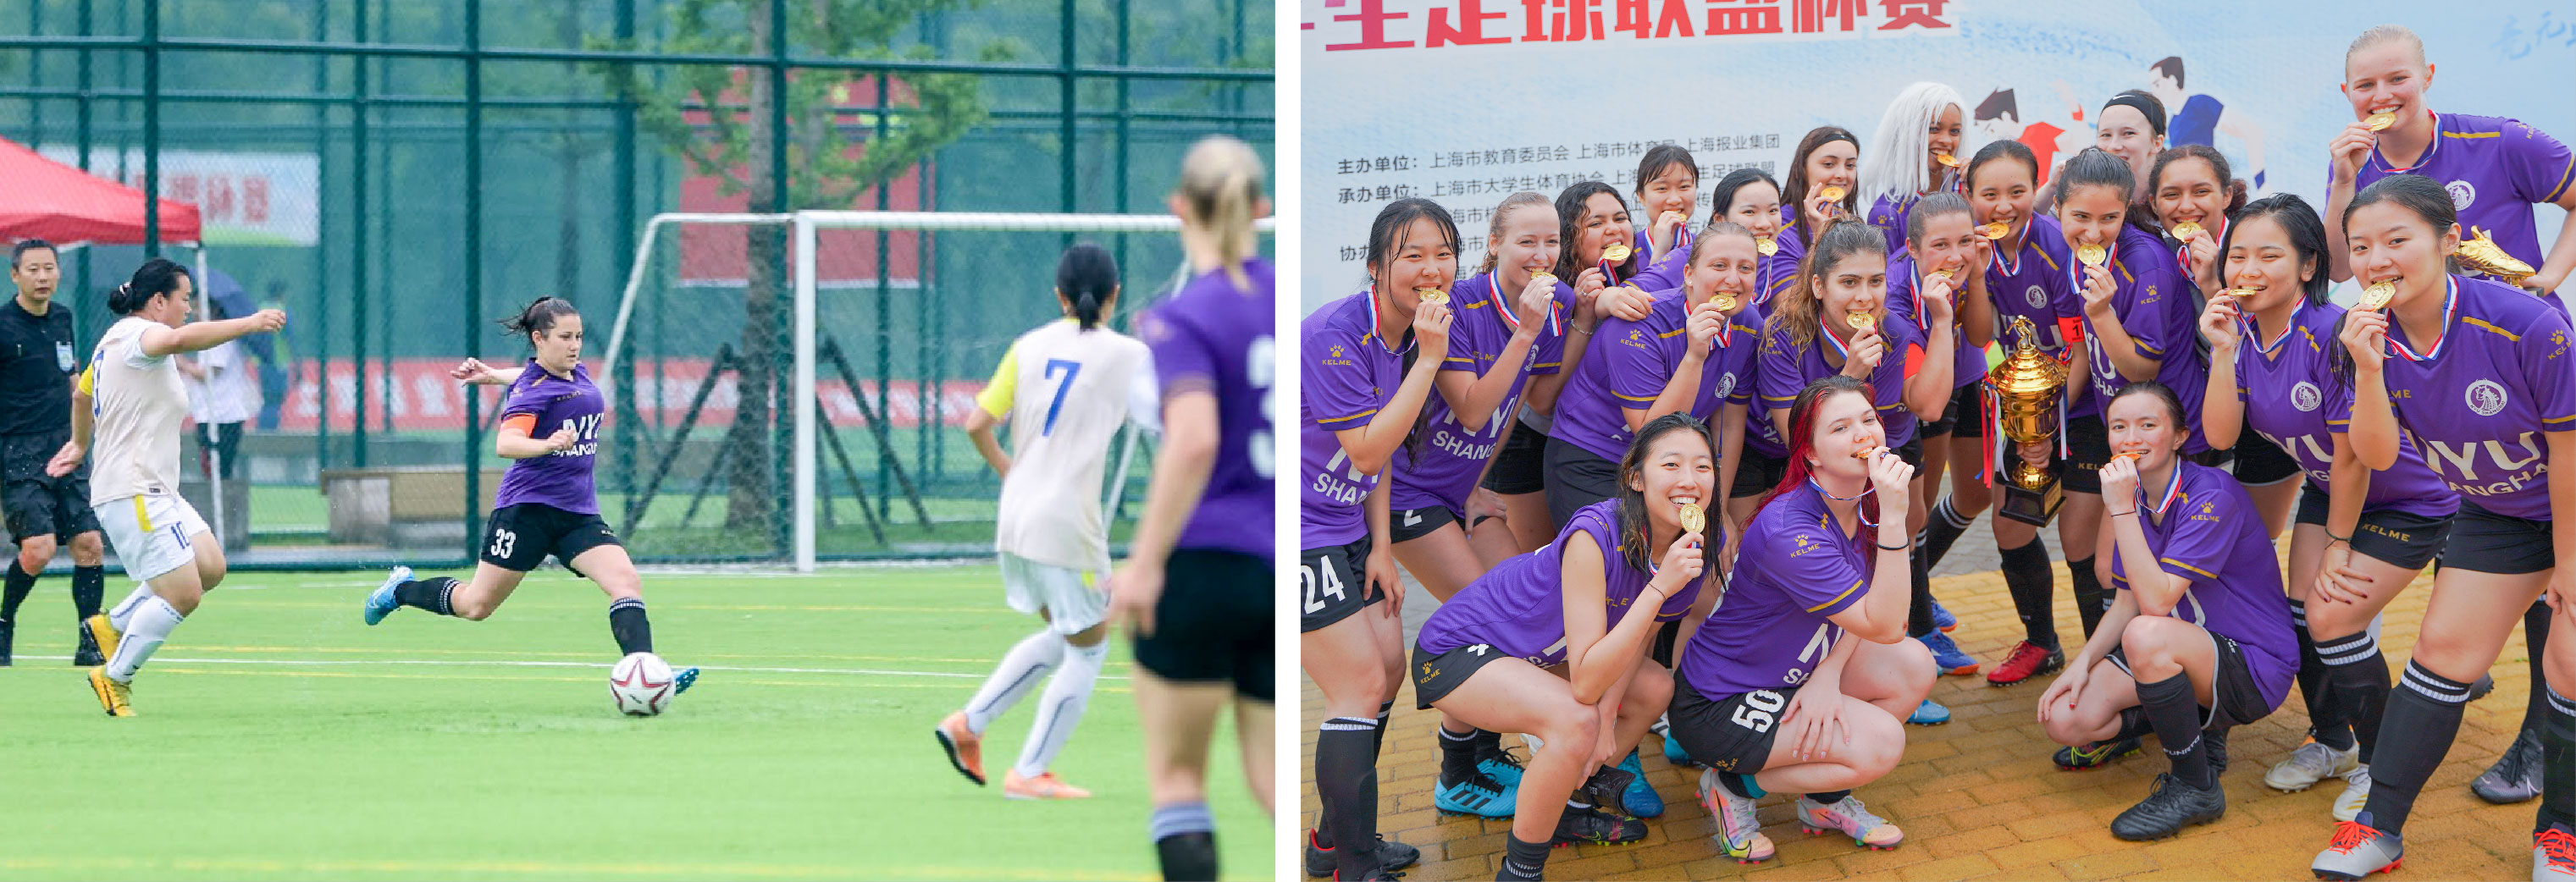 Anderson with the NYU Shanghai women’s soccer team winning the 2021 championship match against Tongji University.